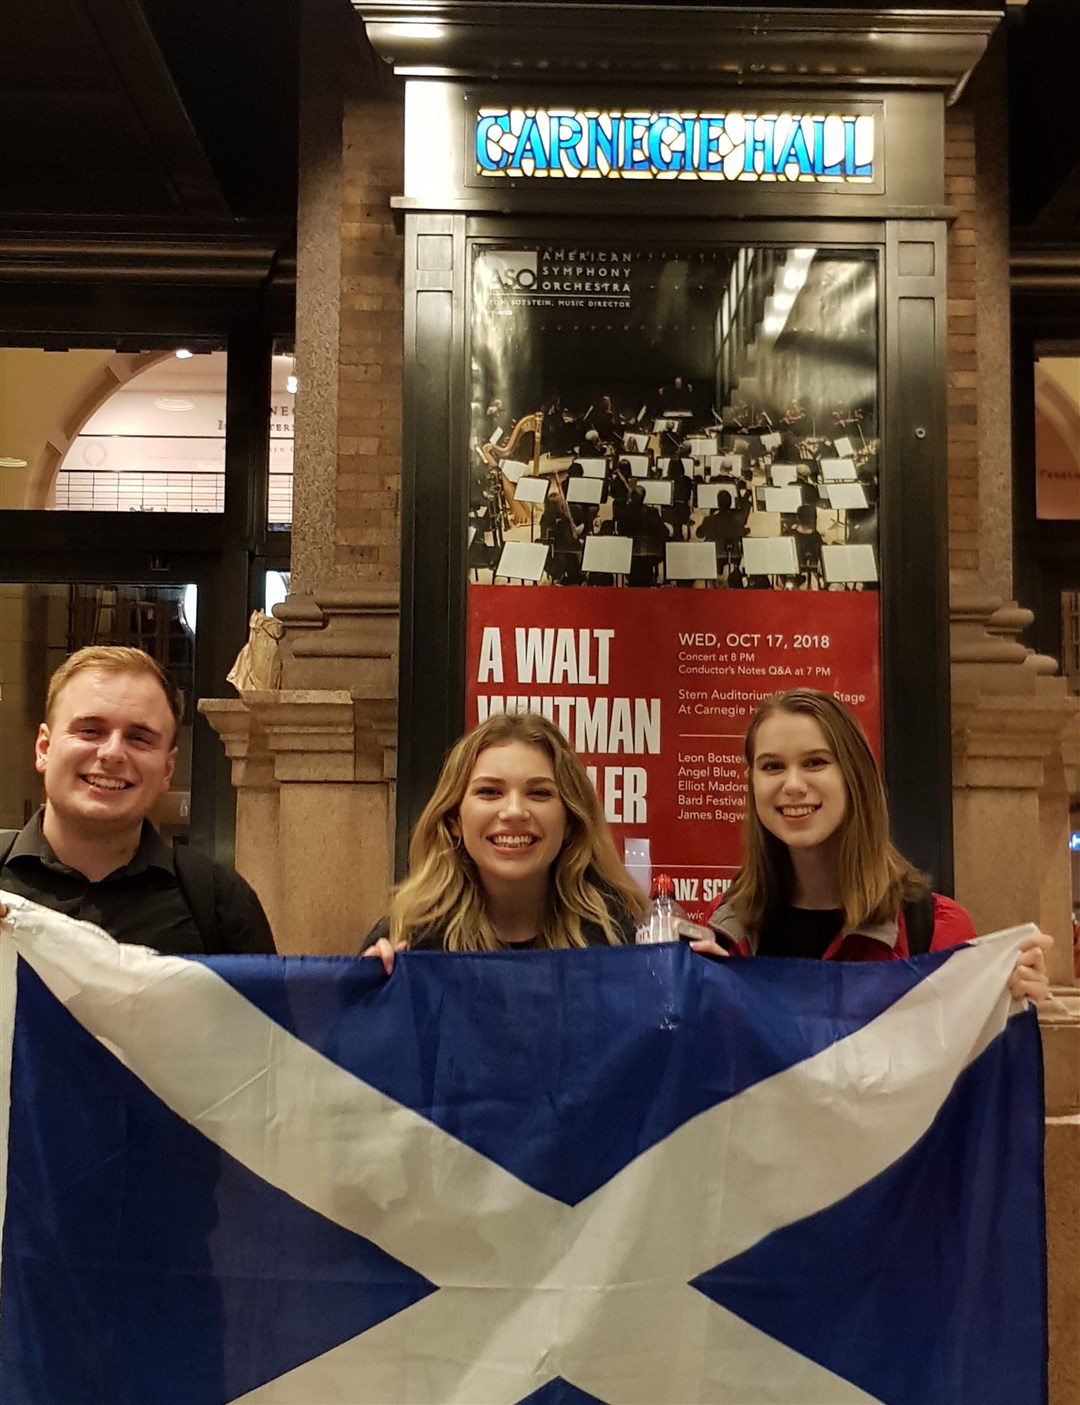 Moray youngsters (from left) Ross Cumming, Erin Ralph and Maria Waszyrowska performed as part of the National Youth Choir of Scotland at the Carnegie Hall in New York City in 2018. The group took to the famous stage with The Orchestra Revolutionnaire et Romantique, conducted by Sir Eliot Gardiner and narrator Simon Callow.